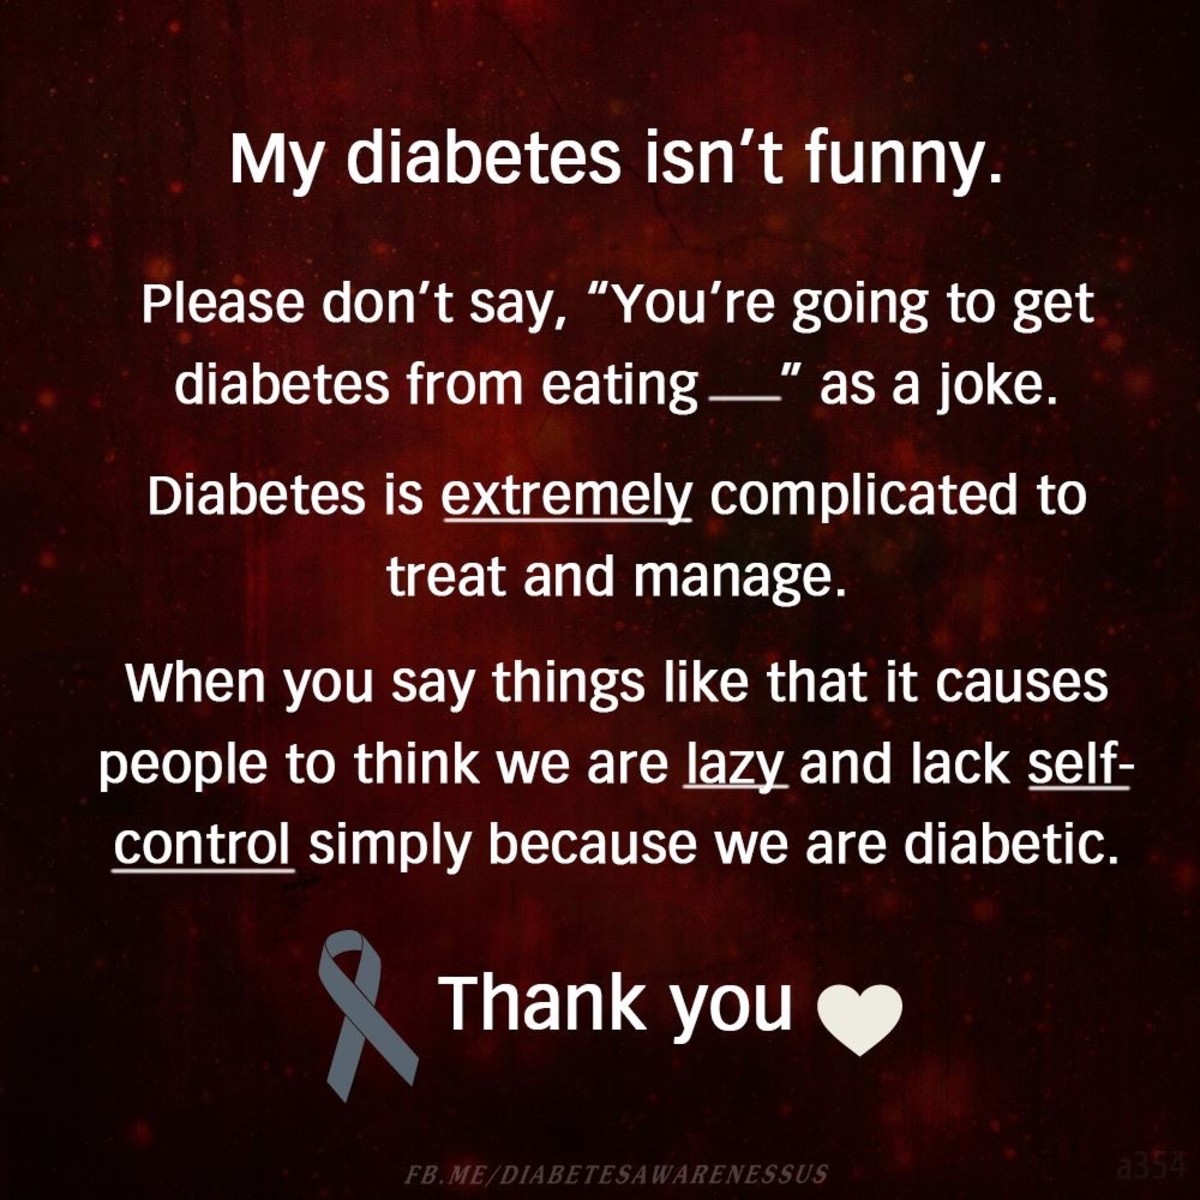 Even though diabetes treatment is becoming more convenient and less invasive, most would still find this statement to be irritating.